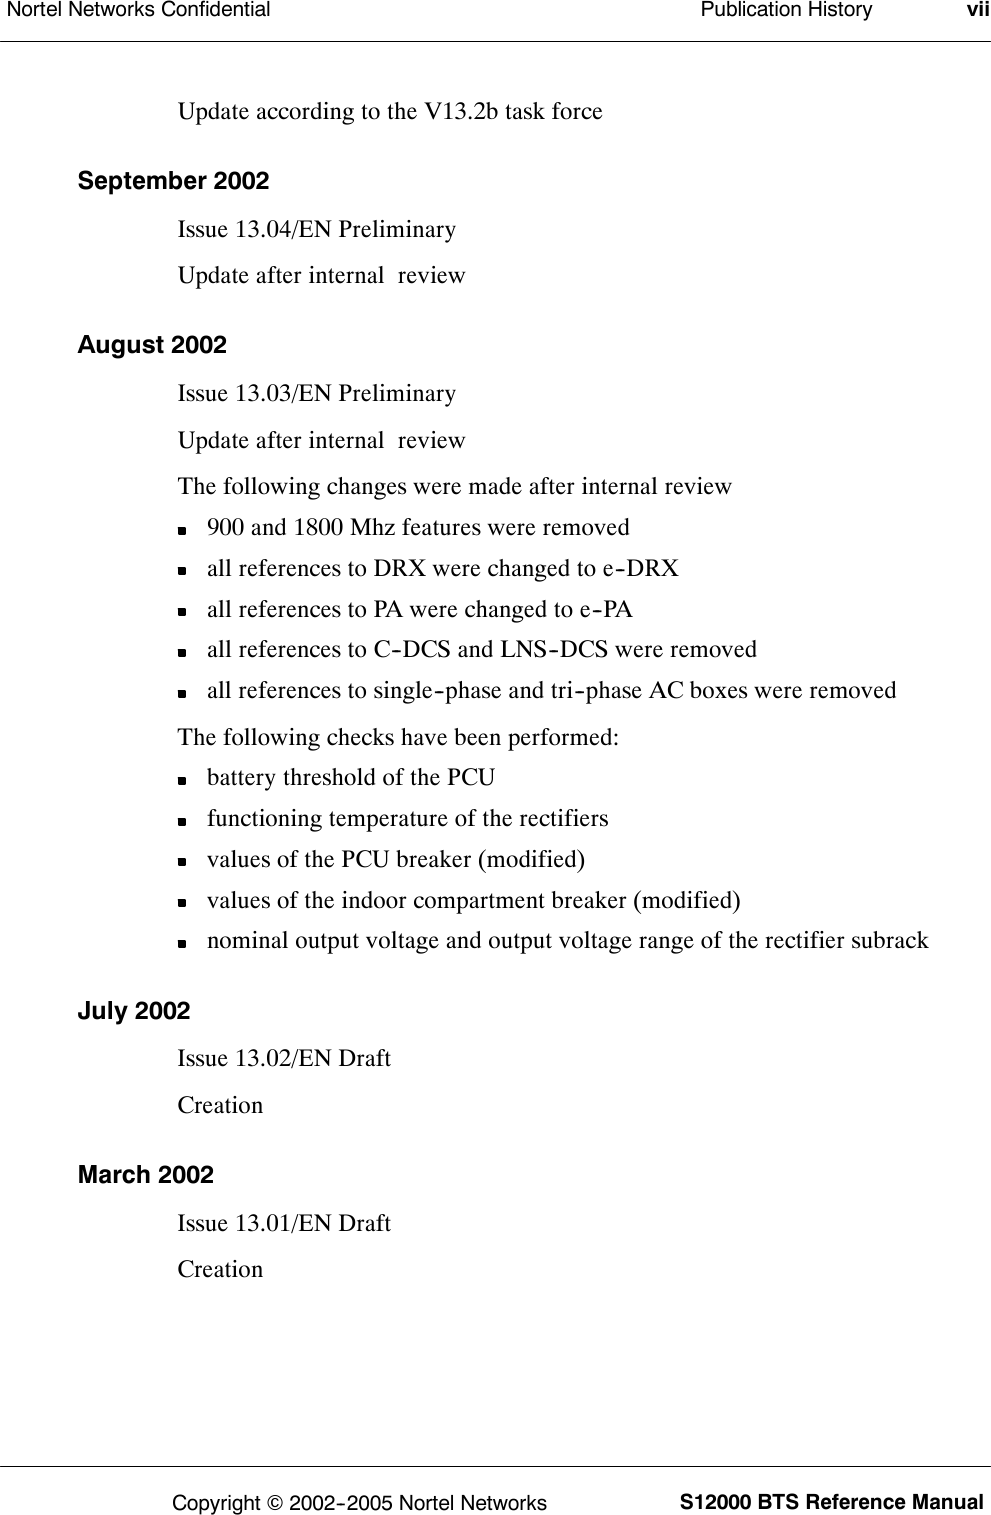 Publication HistoryNortel Networks Confidential viiS12000 BTS Reference ManualCopyright ©2002--2005 Nortel NetworksUpdate according to the V13.2b task forceSeptember 2002Issue 13.04/EN PreliminaryUpdate after internal reviewAugust 2002Issue 13.03/EN PreliminaryUpdate after internal reviewThe following changes were made after internal review900 and 1800 Mhz features were removedall references to DRX were changed to e--DRXall references to PA were changed to e--PAall references to C--DCS and LNS--DCS were removedall references to single--phase and tri--phase AC boxes were removedThe following checks have been performed:battery threshold of the PCUfunctioning temperature of the rectifiersvalues of the PCU breaker (modified)values of the indoor compartment breaker (modified)nominal output voltage and output voltage range of the rectifier subrackJuly 2002Issue 13.02/EN DraftCreationMarch 2002Issue 13.01/EN DraftCreation